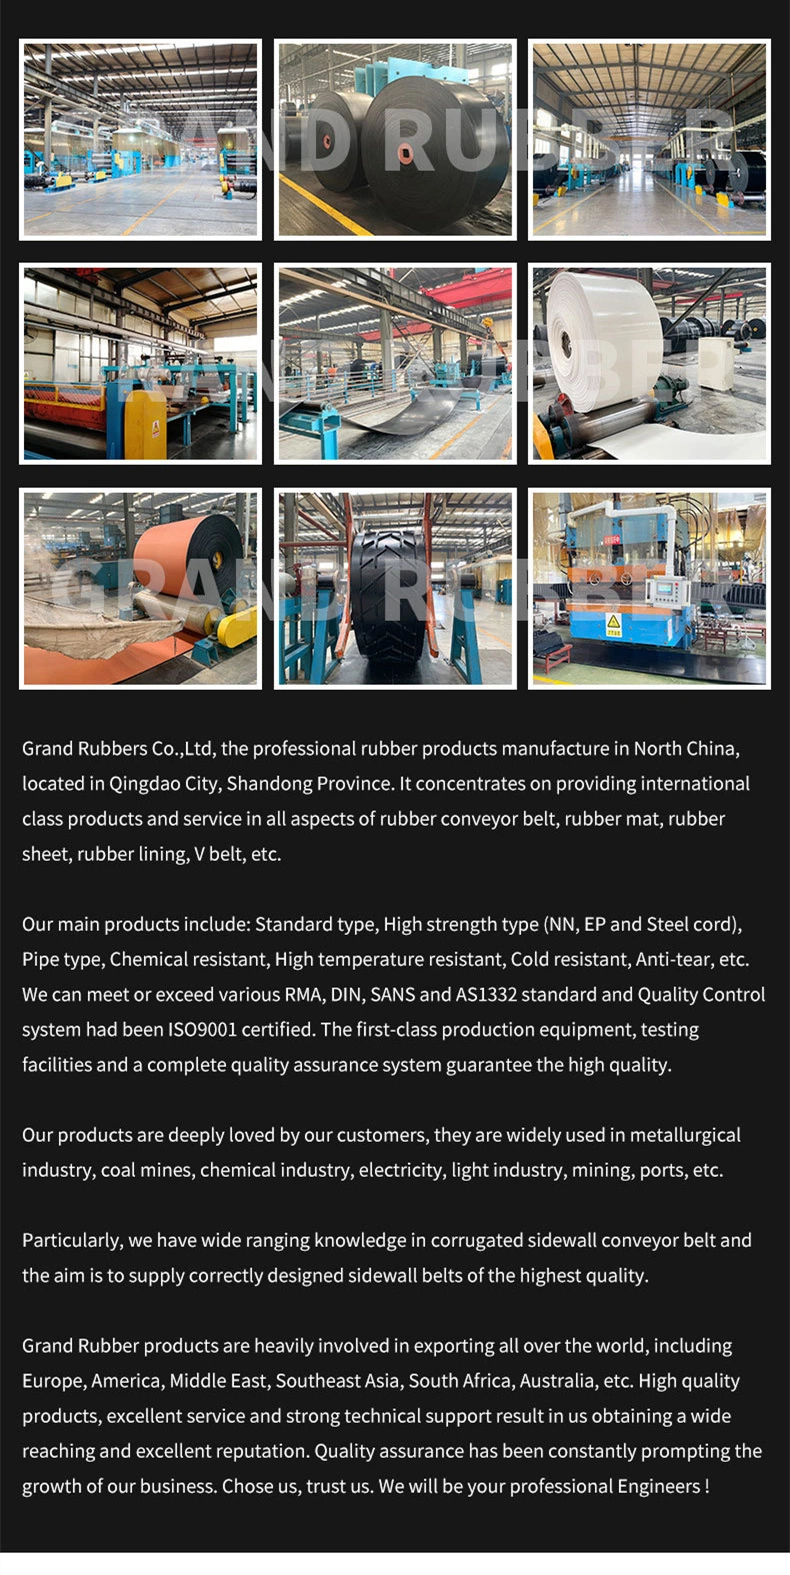 Ep Nn High Strength Fabric Ply DIN Grades Black Rubber Conveyor Belt Factory Price with Quality Warranty Flat Belt for Mine/Quarry/Cement Industries